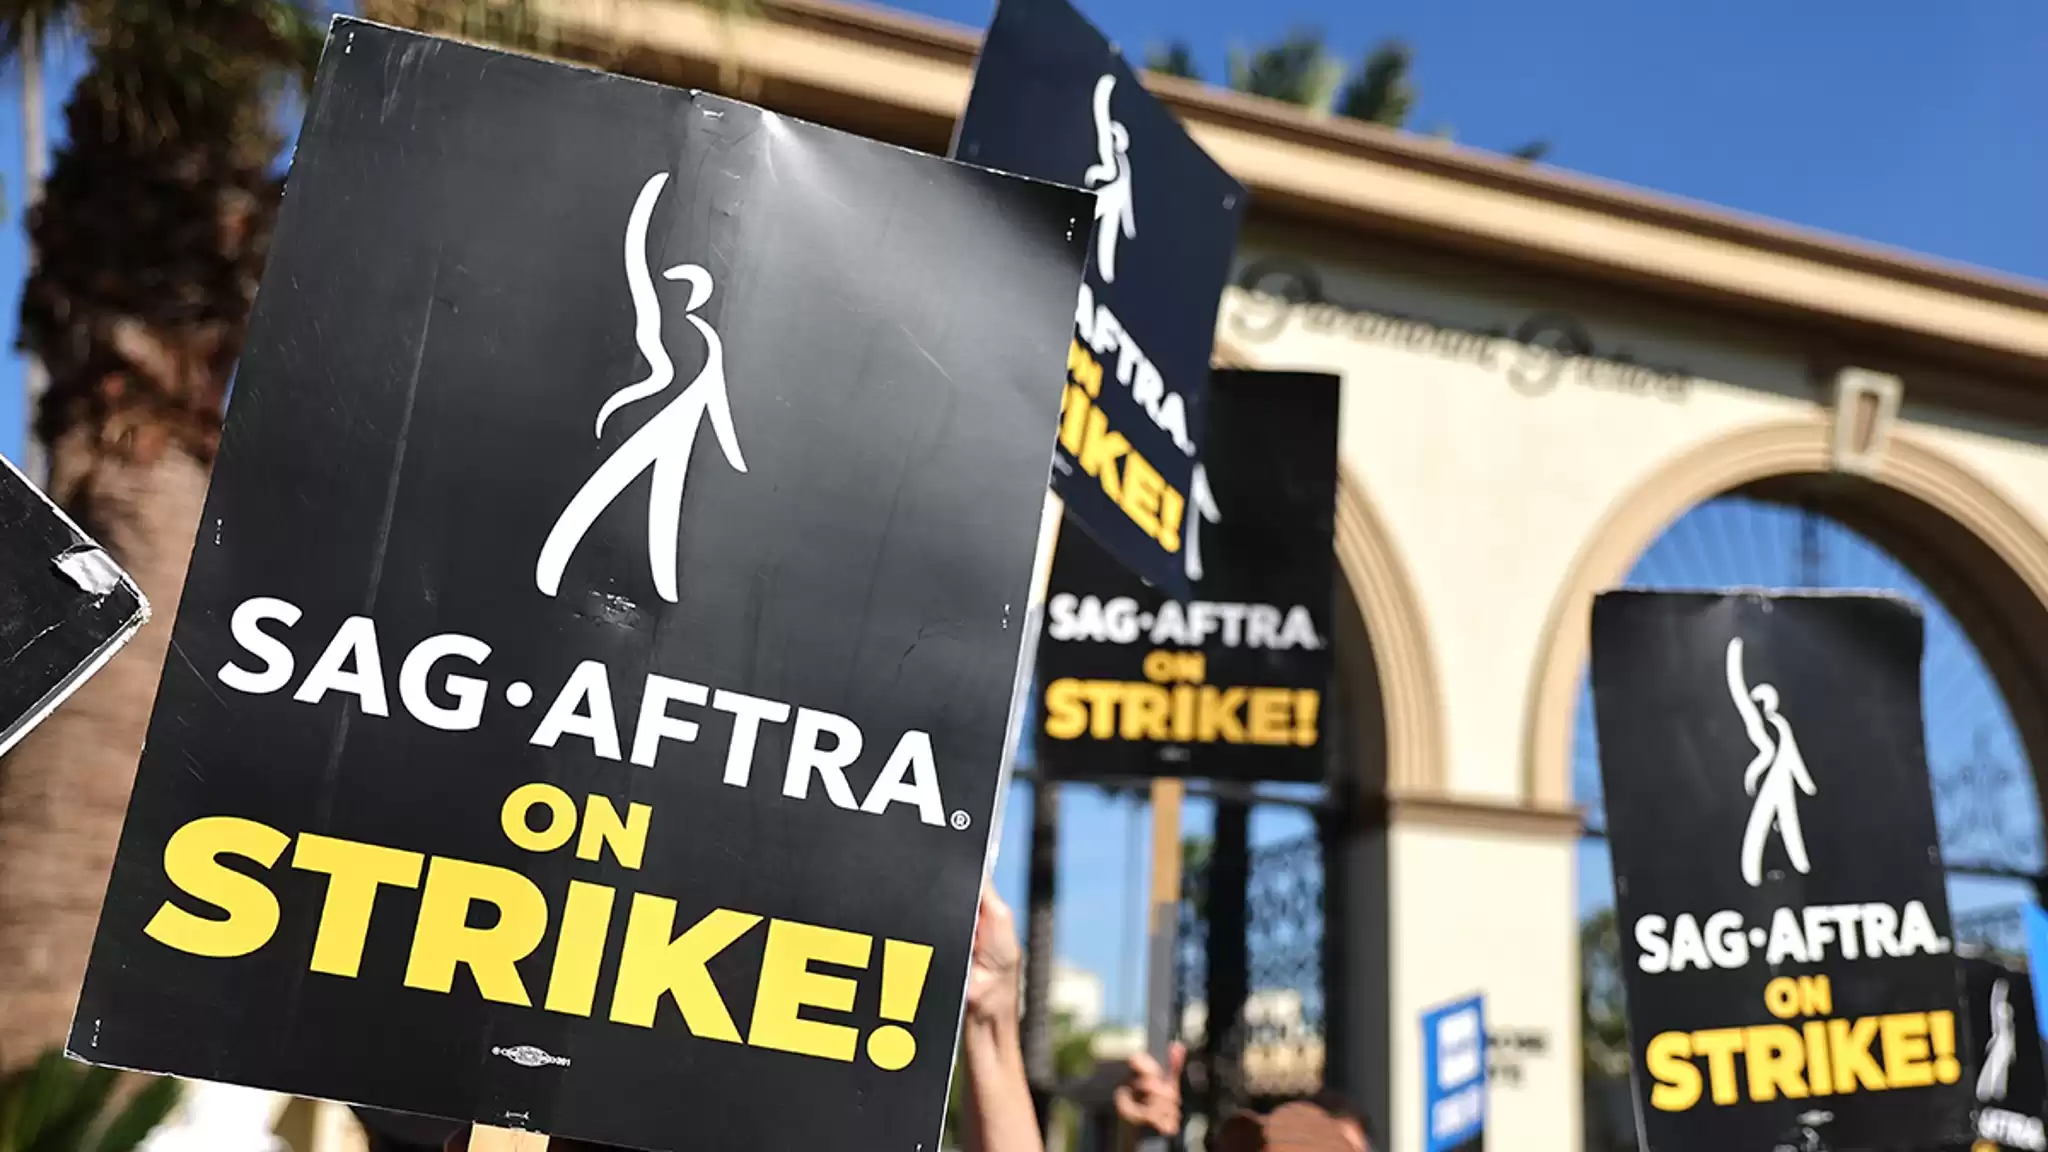 Hollywood SAG-AFTRA Strike Ends with Studios and Actors Agreement